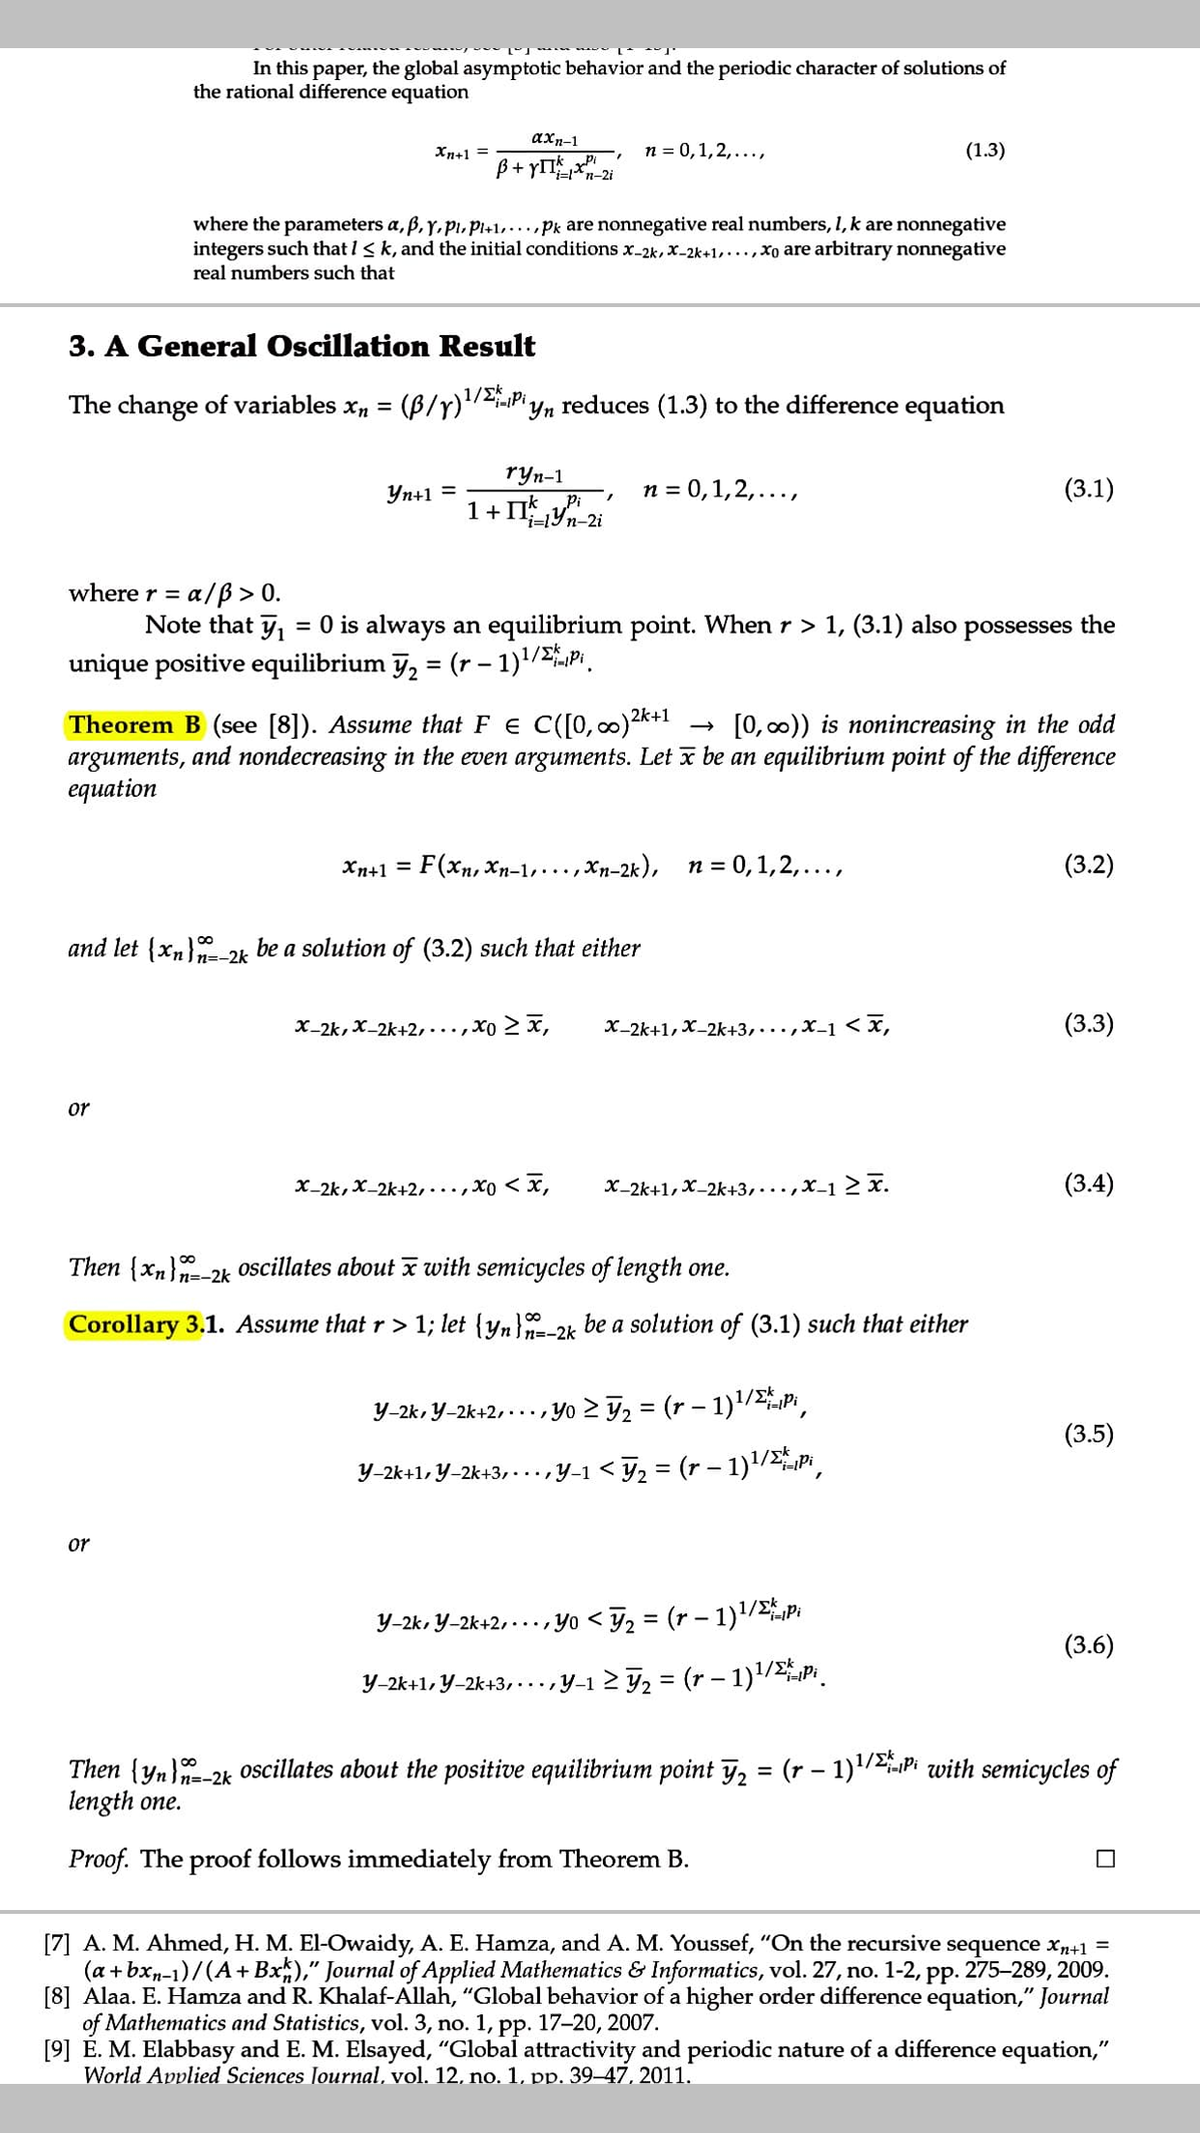 In this paper, the global asymptotic behavior and the periodic character of solutions of
the rational difference equation
axn-1
Xn+1 =
n = 0,1,2,...,
(1.3)
ß+ yITx
i=*n-2i
where the parameters a, ß, y, pi, Pl+1,...pk are nonnegative real numbers, I, k are nonnegative
integers such that I< k, and the initial conditions x-2k,x-2k+1,...,xo are arbitrary nonnegative
real numbers such that
3. A General Oscillation Result
1/2Pi
The change of variables x, = (B/y)"
reduces (1.3) to the difference equation
ryn-1
Pi
n = 0,1,2,...,
(3.1)
Yn+1 =
1+ IIYn-2i
a/ß > 0.
Note that y, = 0 is always an equilibrium point. When r > 1, (3.1) also possesses the
unique positive equilibrium ỹ, = (r – 1)'/P.
where r =
%3D
1/Ek
Theorem B (see [8]). Assume that F E C([0, c0)2k+1
arguments, and nondecreasing in the even arguments. Let x be an equilibrium point of the difference
equation
[0, 00)) is nonincreasing in the odd
Xn+1 =
F(xп, Хр-1,, хр-2к), п%3D0,1,2,...,
(3.2)
and let {xn} 2k be a solution of (3.2) such that either
n=-2k
X-2k, X-2k+2,...,xo 2 x,
X-2k+1, X-2k+3,...,X-1 < x,
(3.3)
or
X-2k, X-2k+2,...,xo < x,
X-2k+1, X_2k+3,...,x-1 2 x.
(3.4)
Then {x,}-2k oscillates about x with semicycles of length one.
Corollary 3.1. Assume that r> 1; let {yn}-2k be a solution of (3.1) such that either
Y-2k, Y-2k+2,..., Yo > y, = (r – 1)1/Pi
(3.5)
Y-2k+1, Y-2k+3, -..,y-1 < y, = (r – 1)/Pi
or
Y-2k, Y-2k+2, -.., Yo < F2 = (r – 1)'/p
(3.6)
Y-2k+1, Y-2k+3,..,
„Y-1 2 F2 = (r – 1)/P.
%3D
Then {yn}-2k Oscillates about the positive equilibrium point y, = (r – 1)'/2Pi with semicycles of
length one.
n=-2k
Proof. The proof follows immediately from Theorem B.
[7] A. M. Ahmed, H. M. El-Owaidy, A. E. Hamza, and A. M. Youssef, "On the recursive sequence xp+1 =
(a + bxn-1)/(A+ Bx)," Journal of Applied Mathematics & Informatics, vol. 27, no. 1-2, pp. 275-289, 2009.
[8] Alaa. E. Hamza and R. Khalaf-Allah, "Global behavior of a higher order difference equation," Journal
of Mathematics and Statistics, vol. 3, no. 1, pp. 17-20, 2007.
[9] E. M. Elabbasy and E. M. Elsayed, "Global attractivity and periodic nature of a difference equation,"
World Applied Sciences Journal, vol. 12, no. 1, pp. 39-47, 2011.
